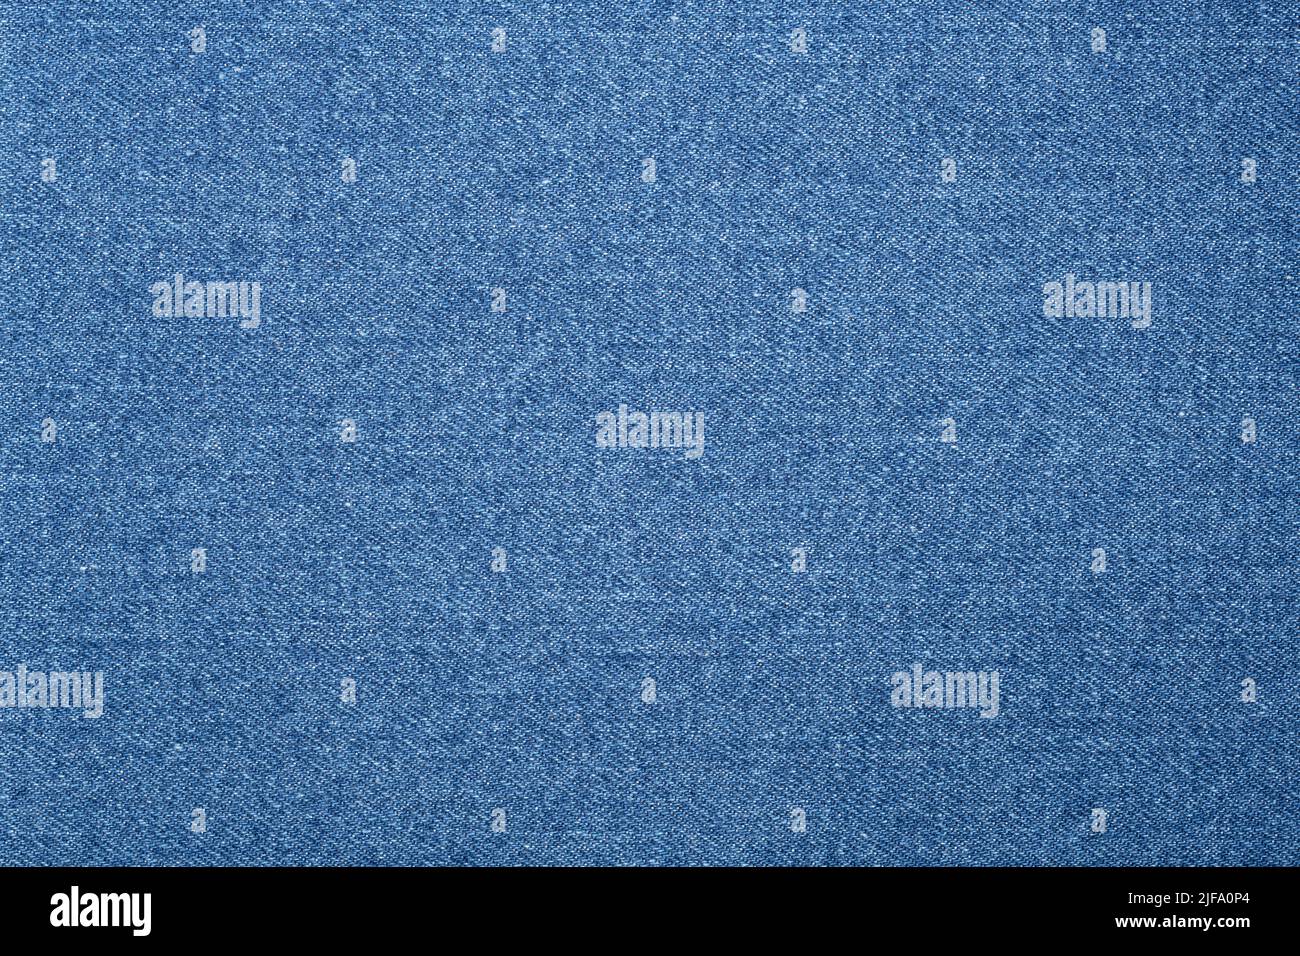 Textured fabric background. A jean or denim texture in light blue. Stock Photo